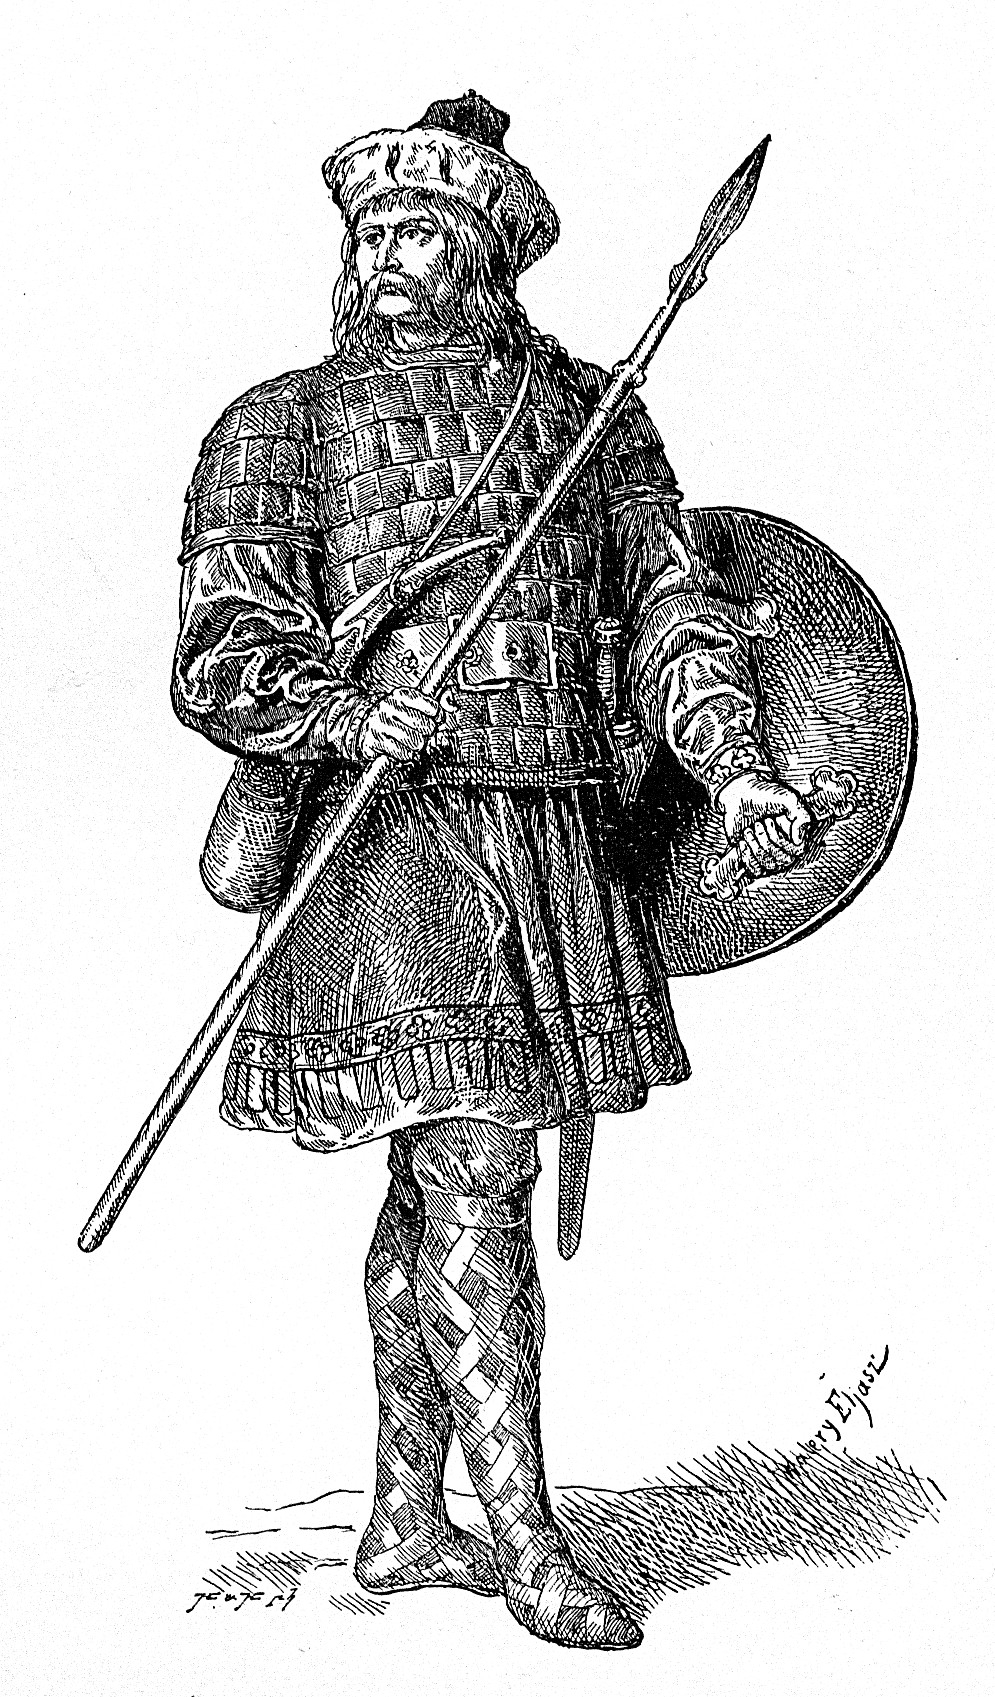 a detailed line drawing of 
Siemowit in battle regalia and holding a sword in one hand and a round shield in the other.